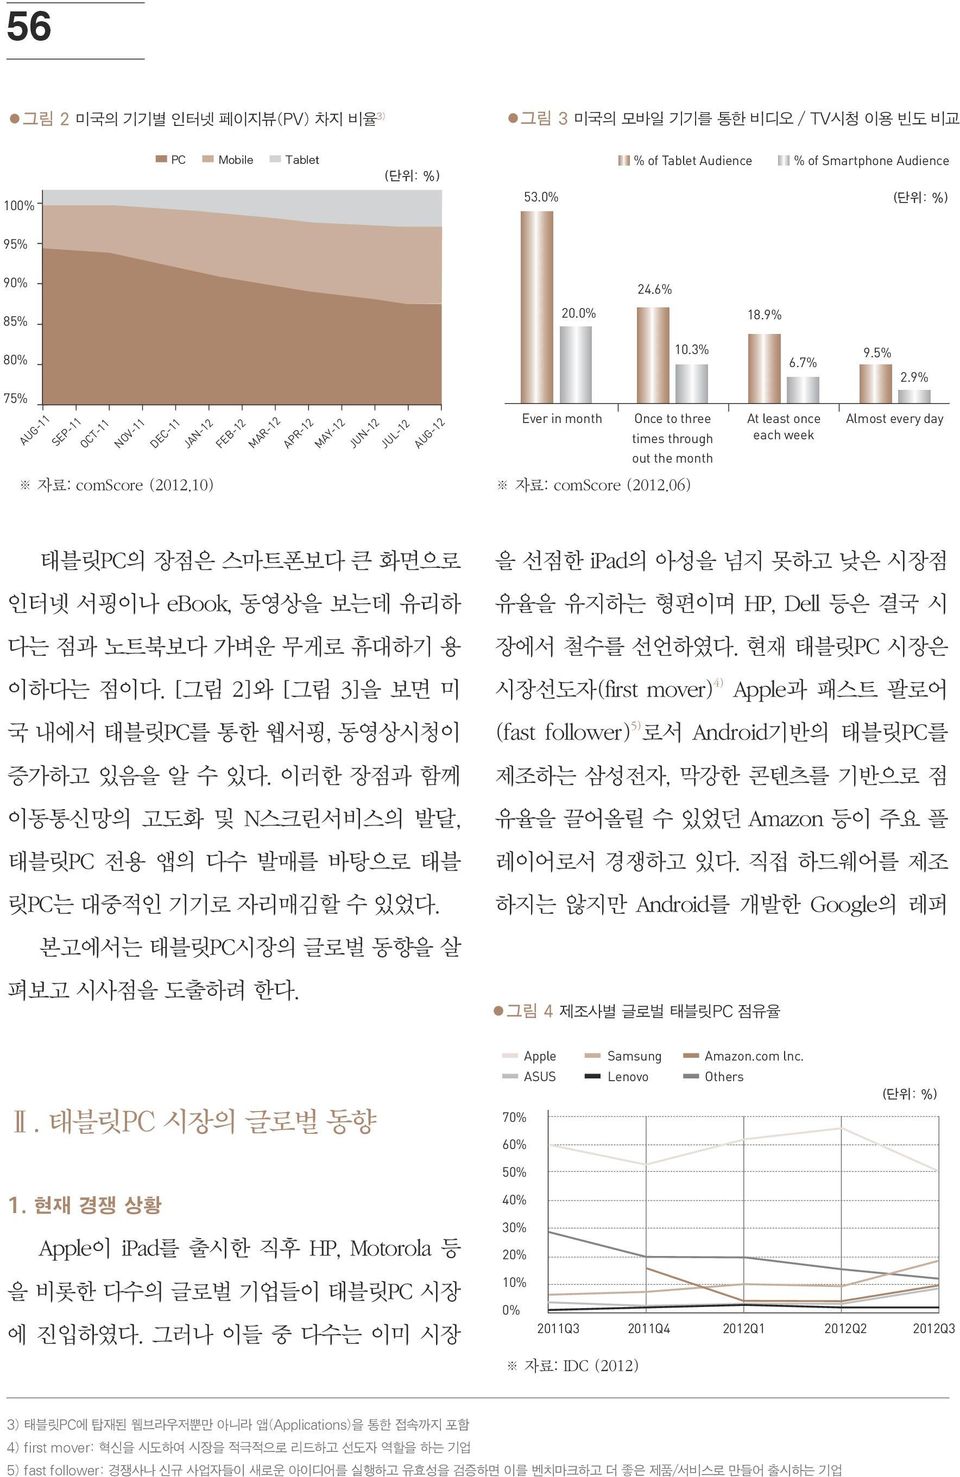 3% Once to three times through out the month 자료: comscore (2012.10) 자료: comscore (2012.06) 18.9% 6.7% At least once each week 9.5% 2.